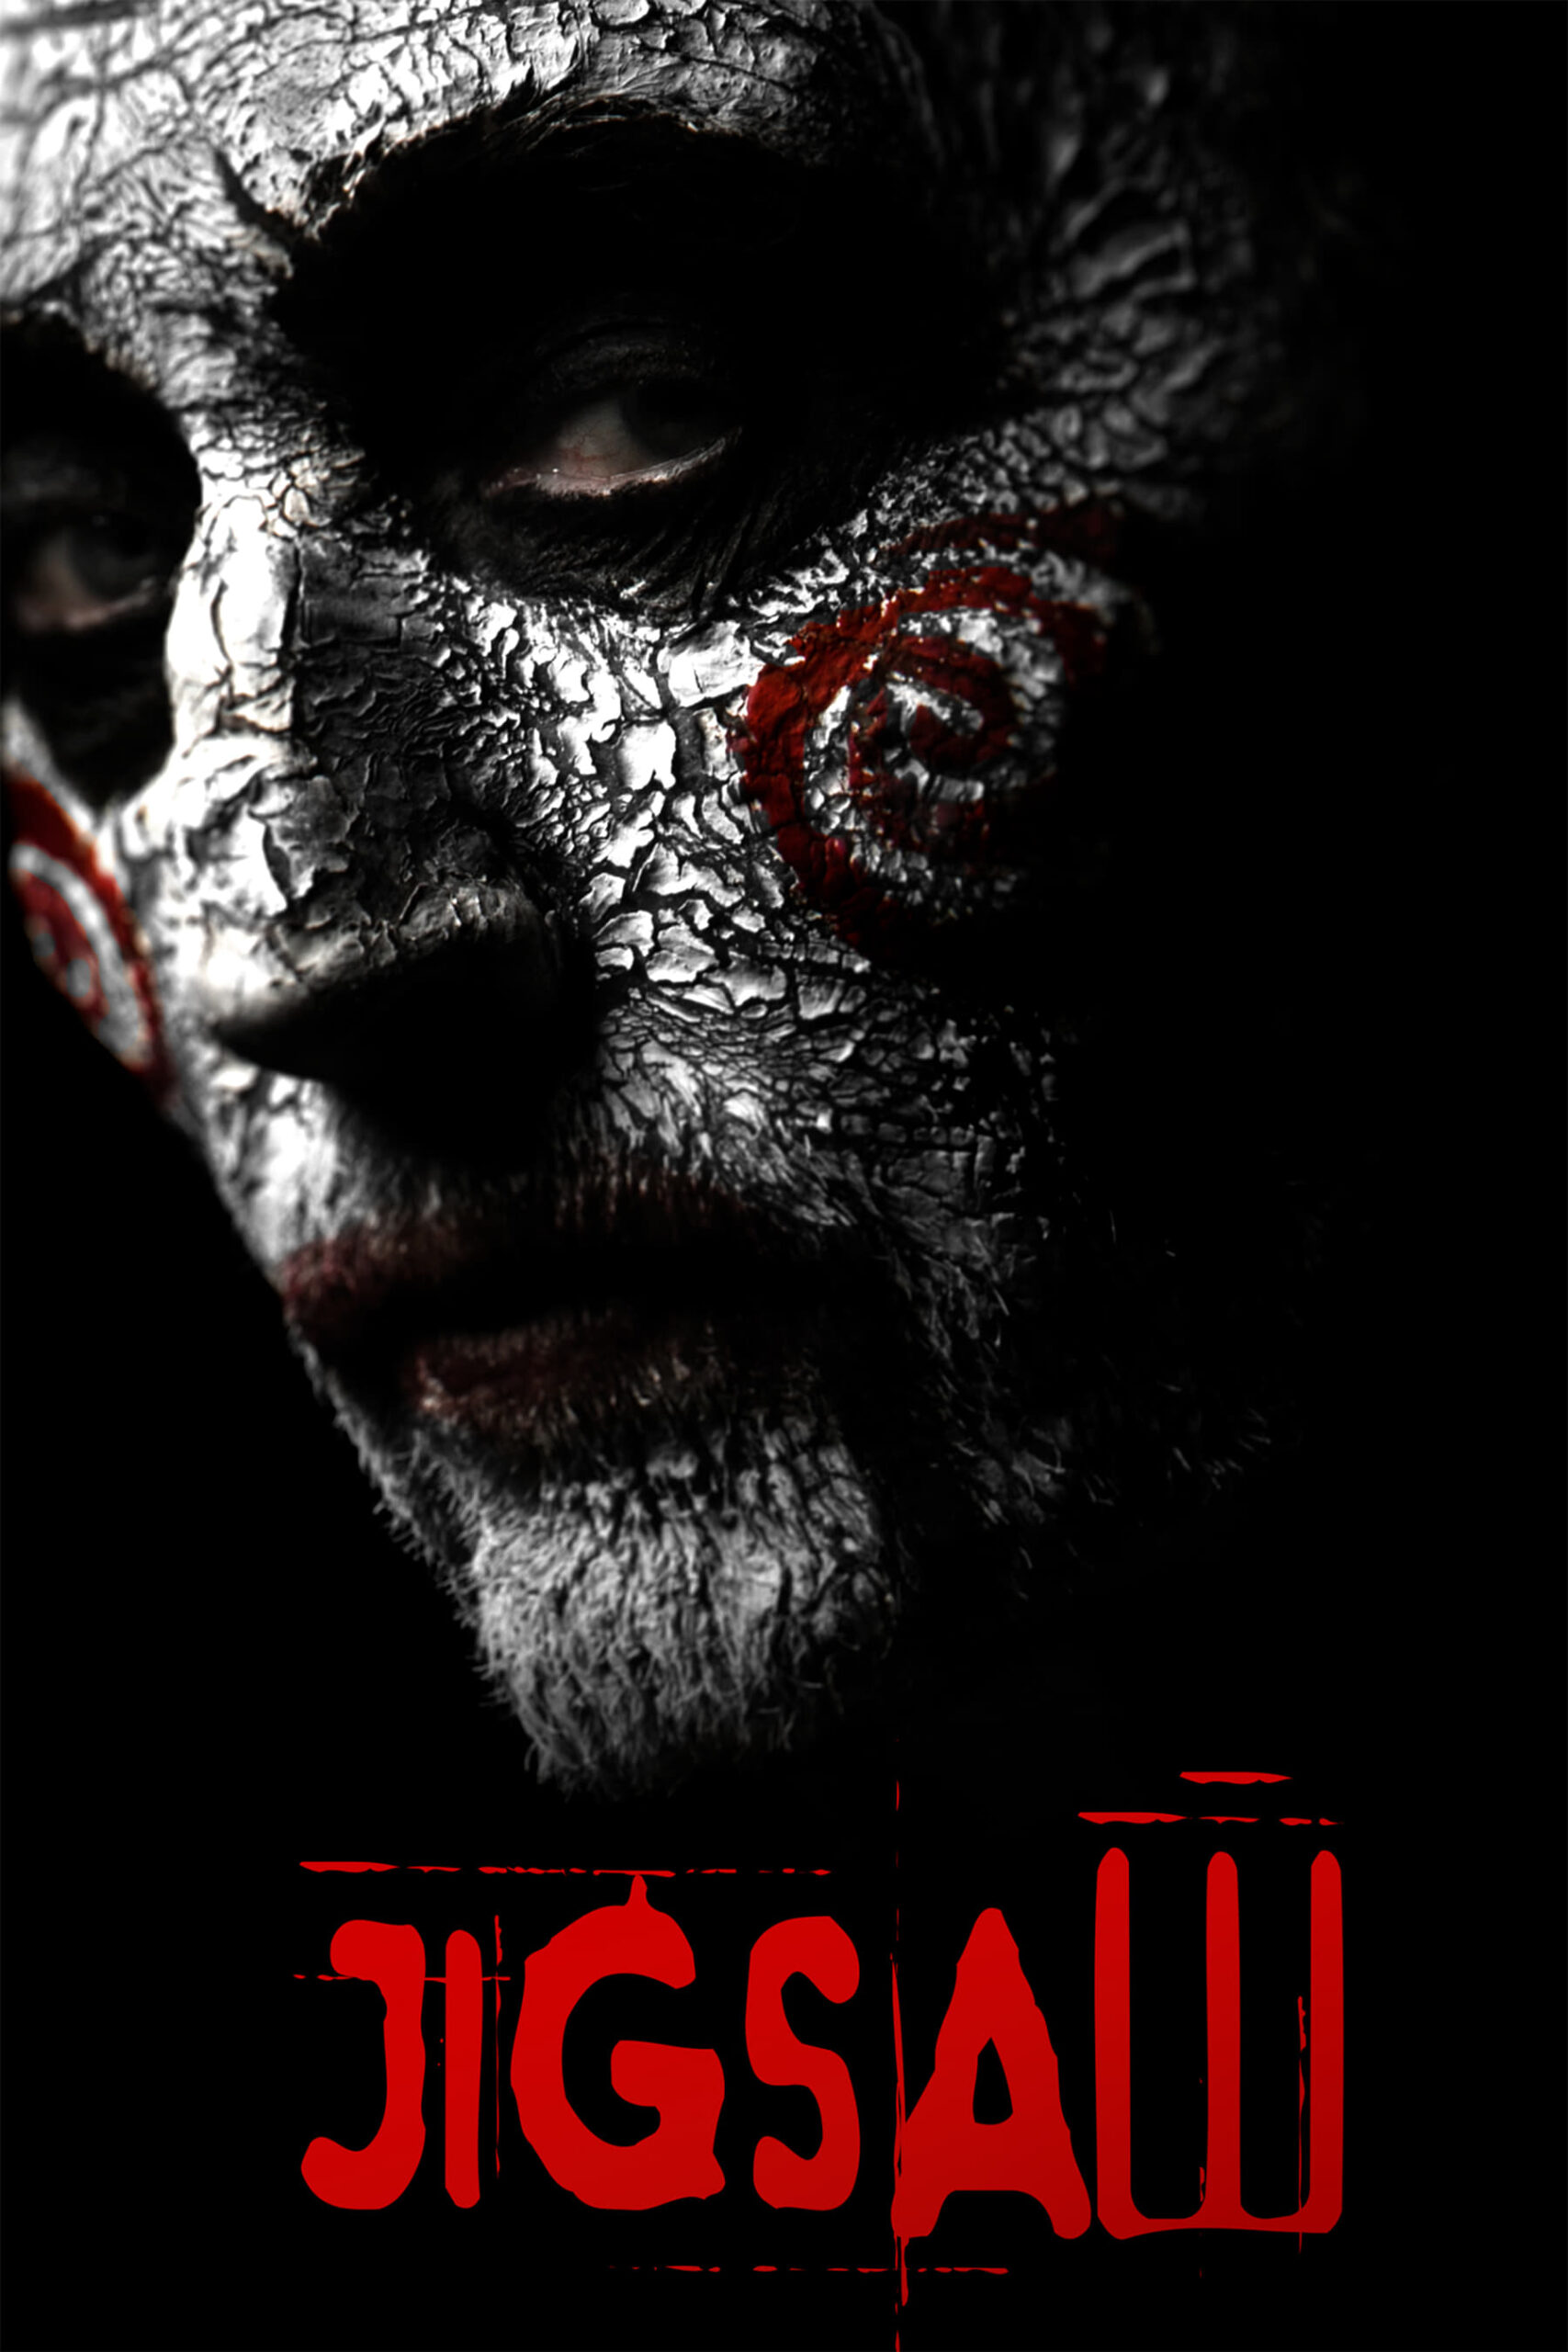 Poster for the movie "Jigsaw"